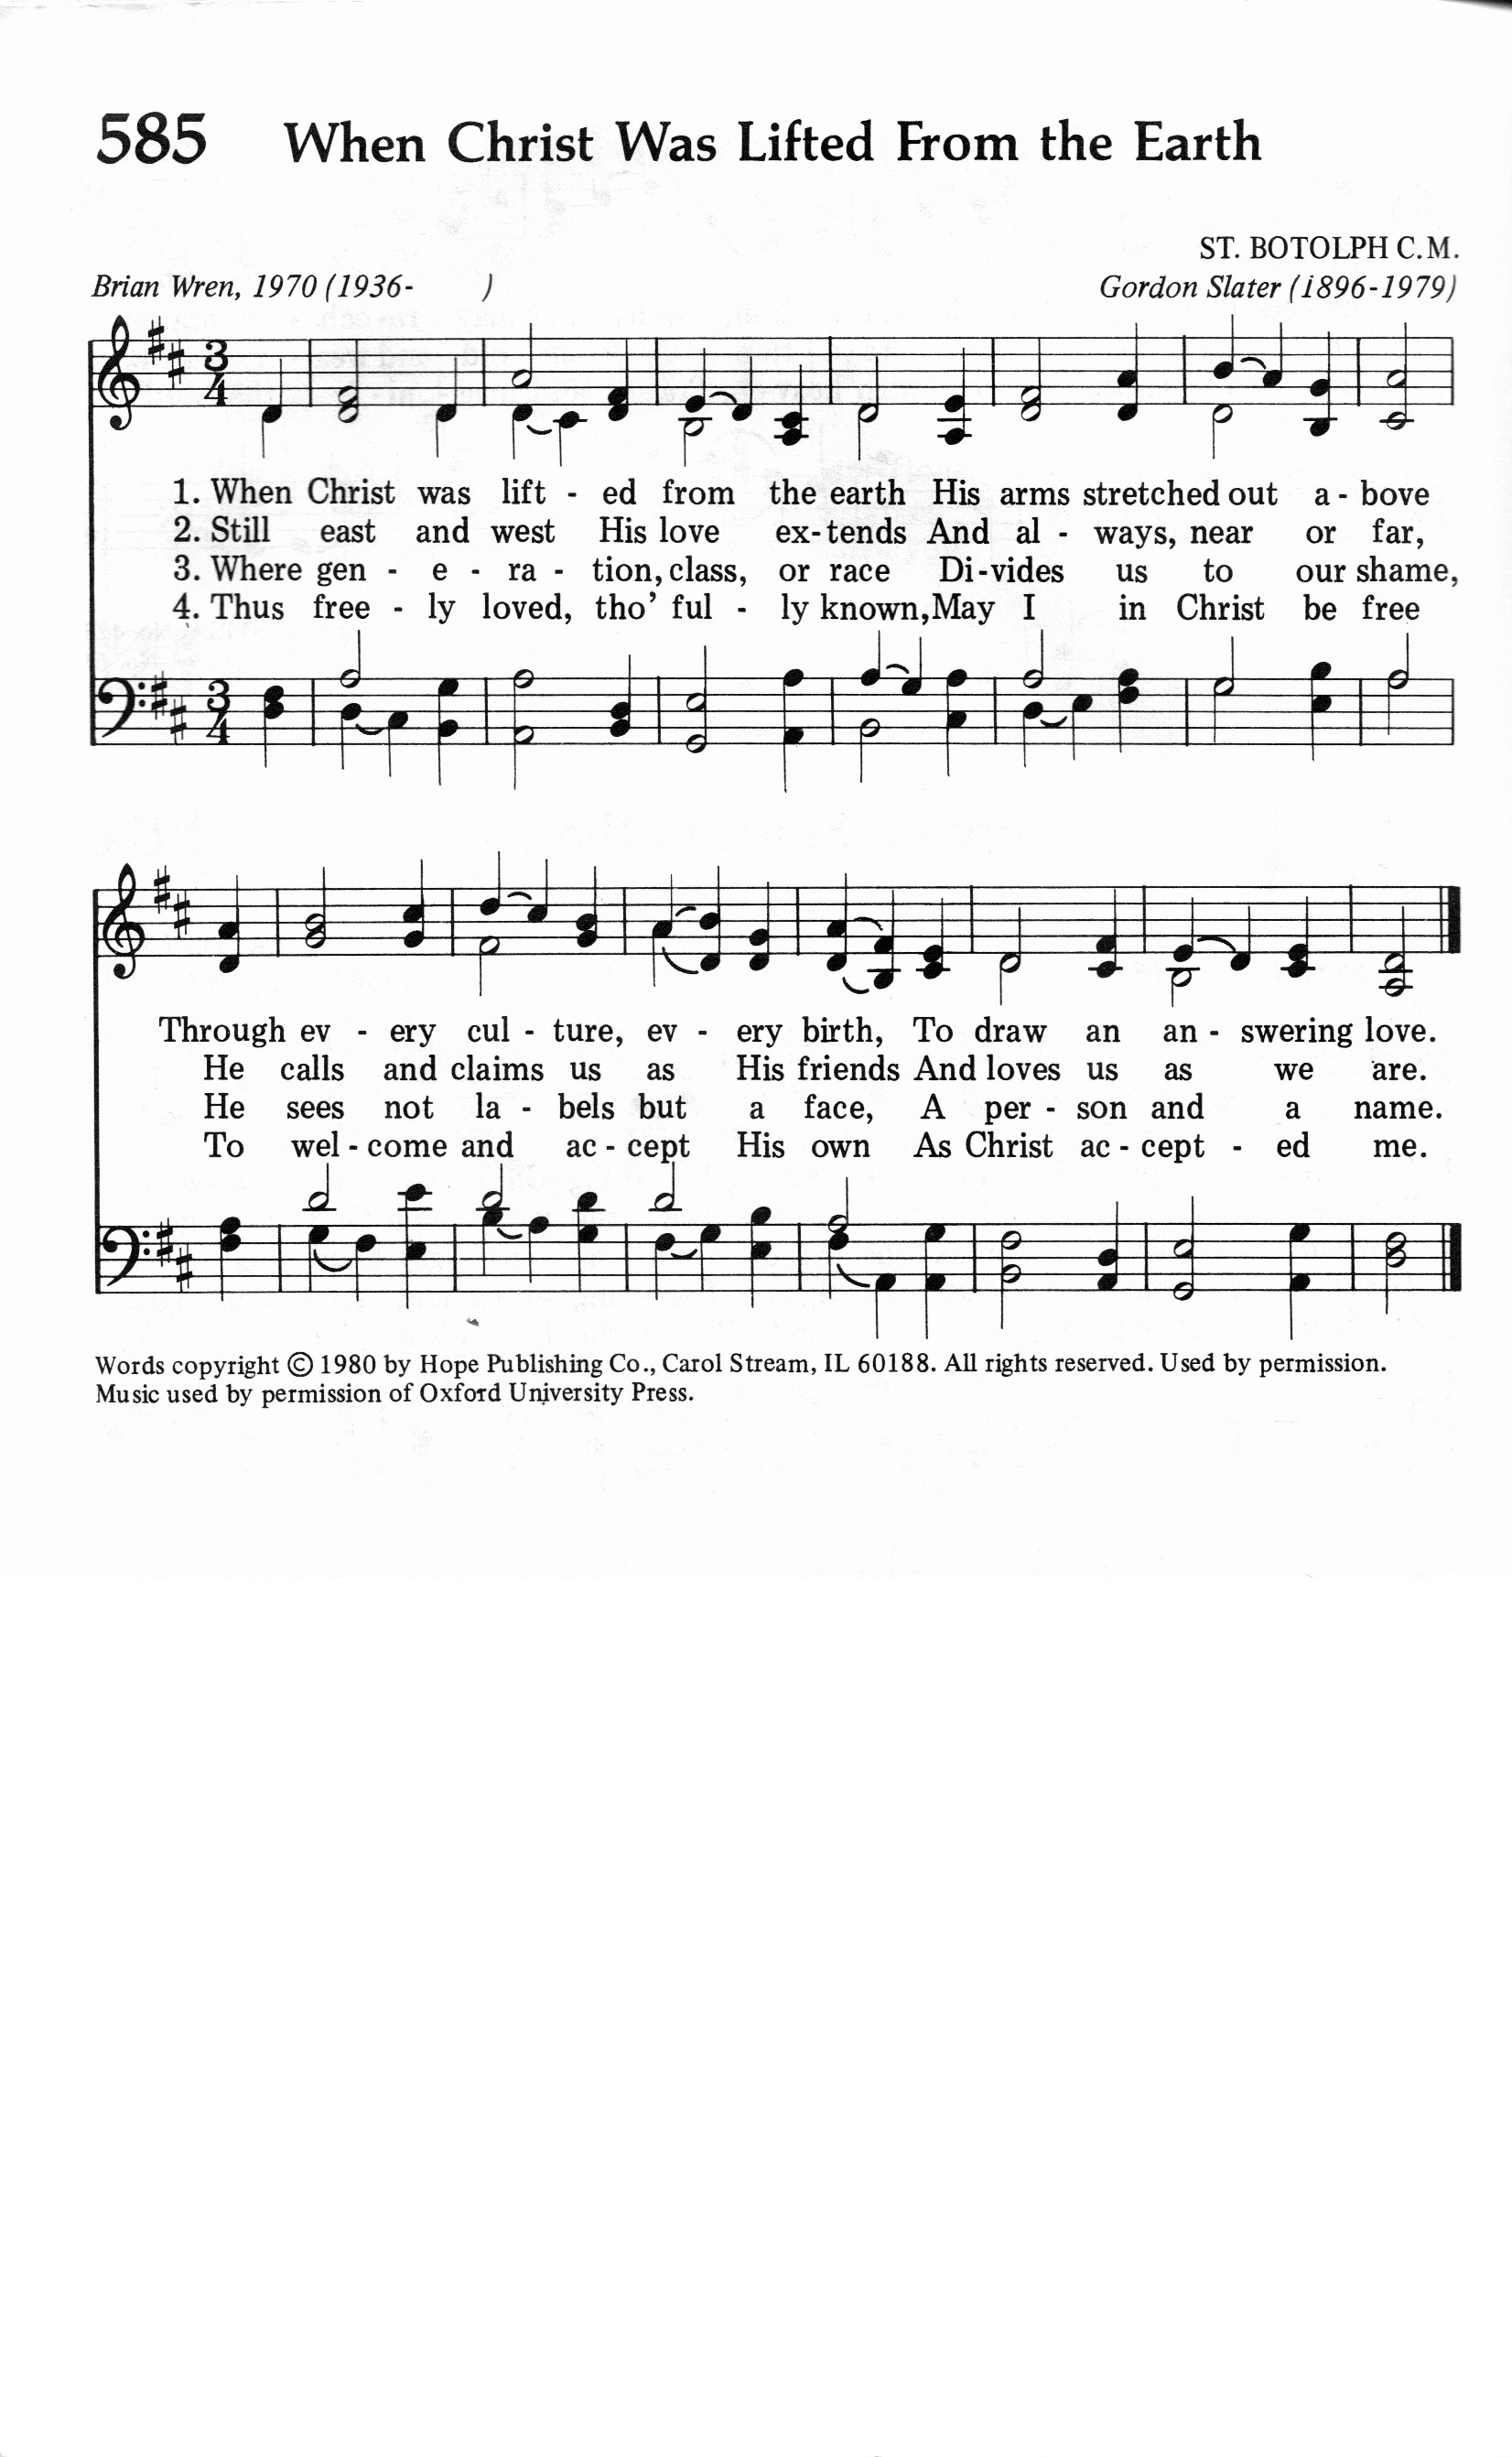 585.When Christ Was Lifted From the Earth-695HYMN